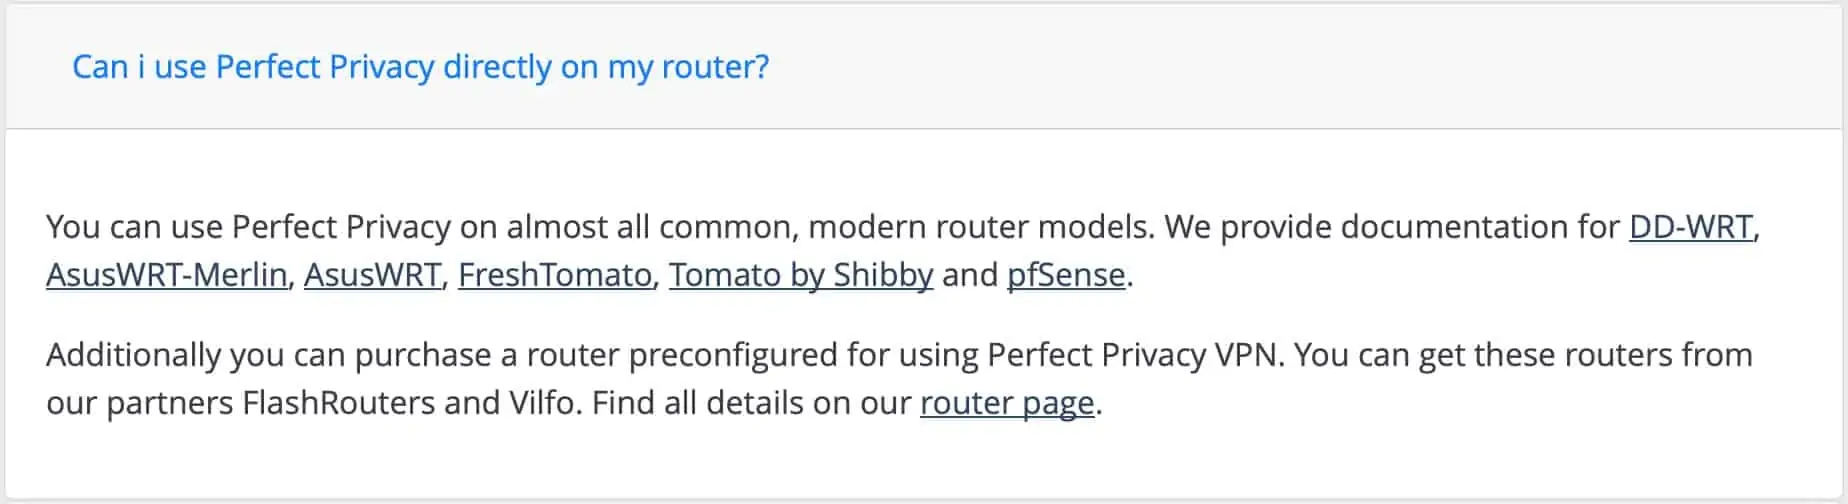 PerfectPrivacy - Routers